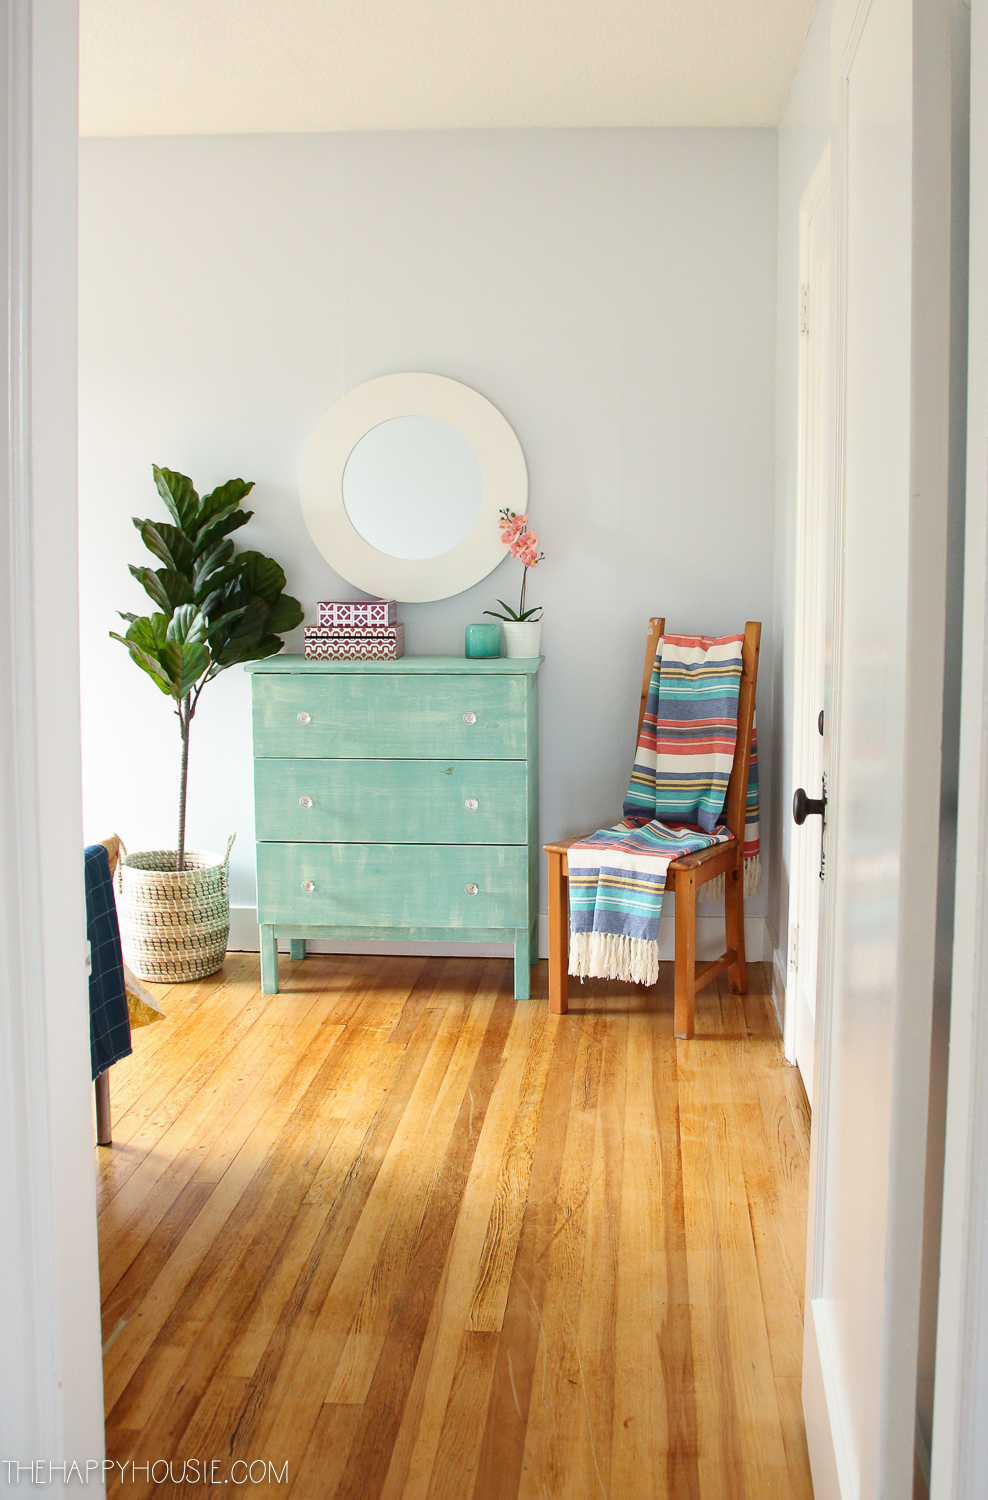 Wood floors and a turquoise dresser.